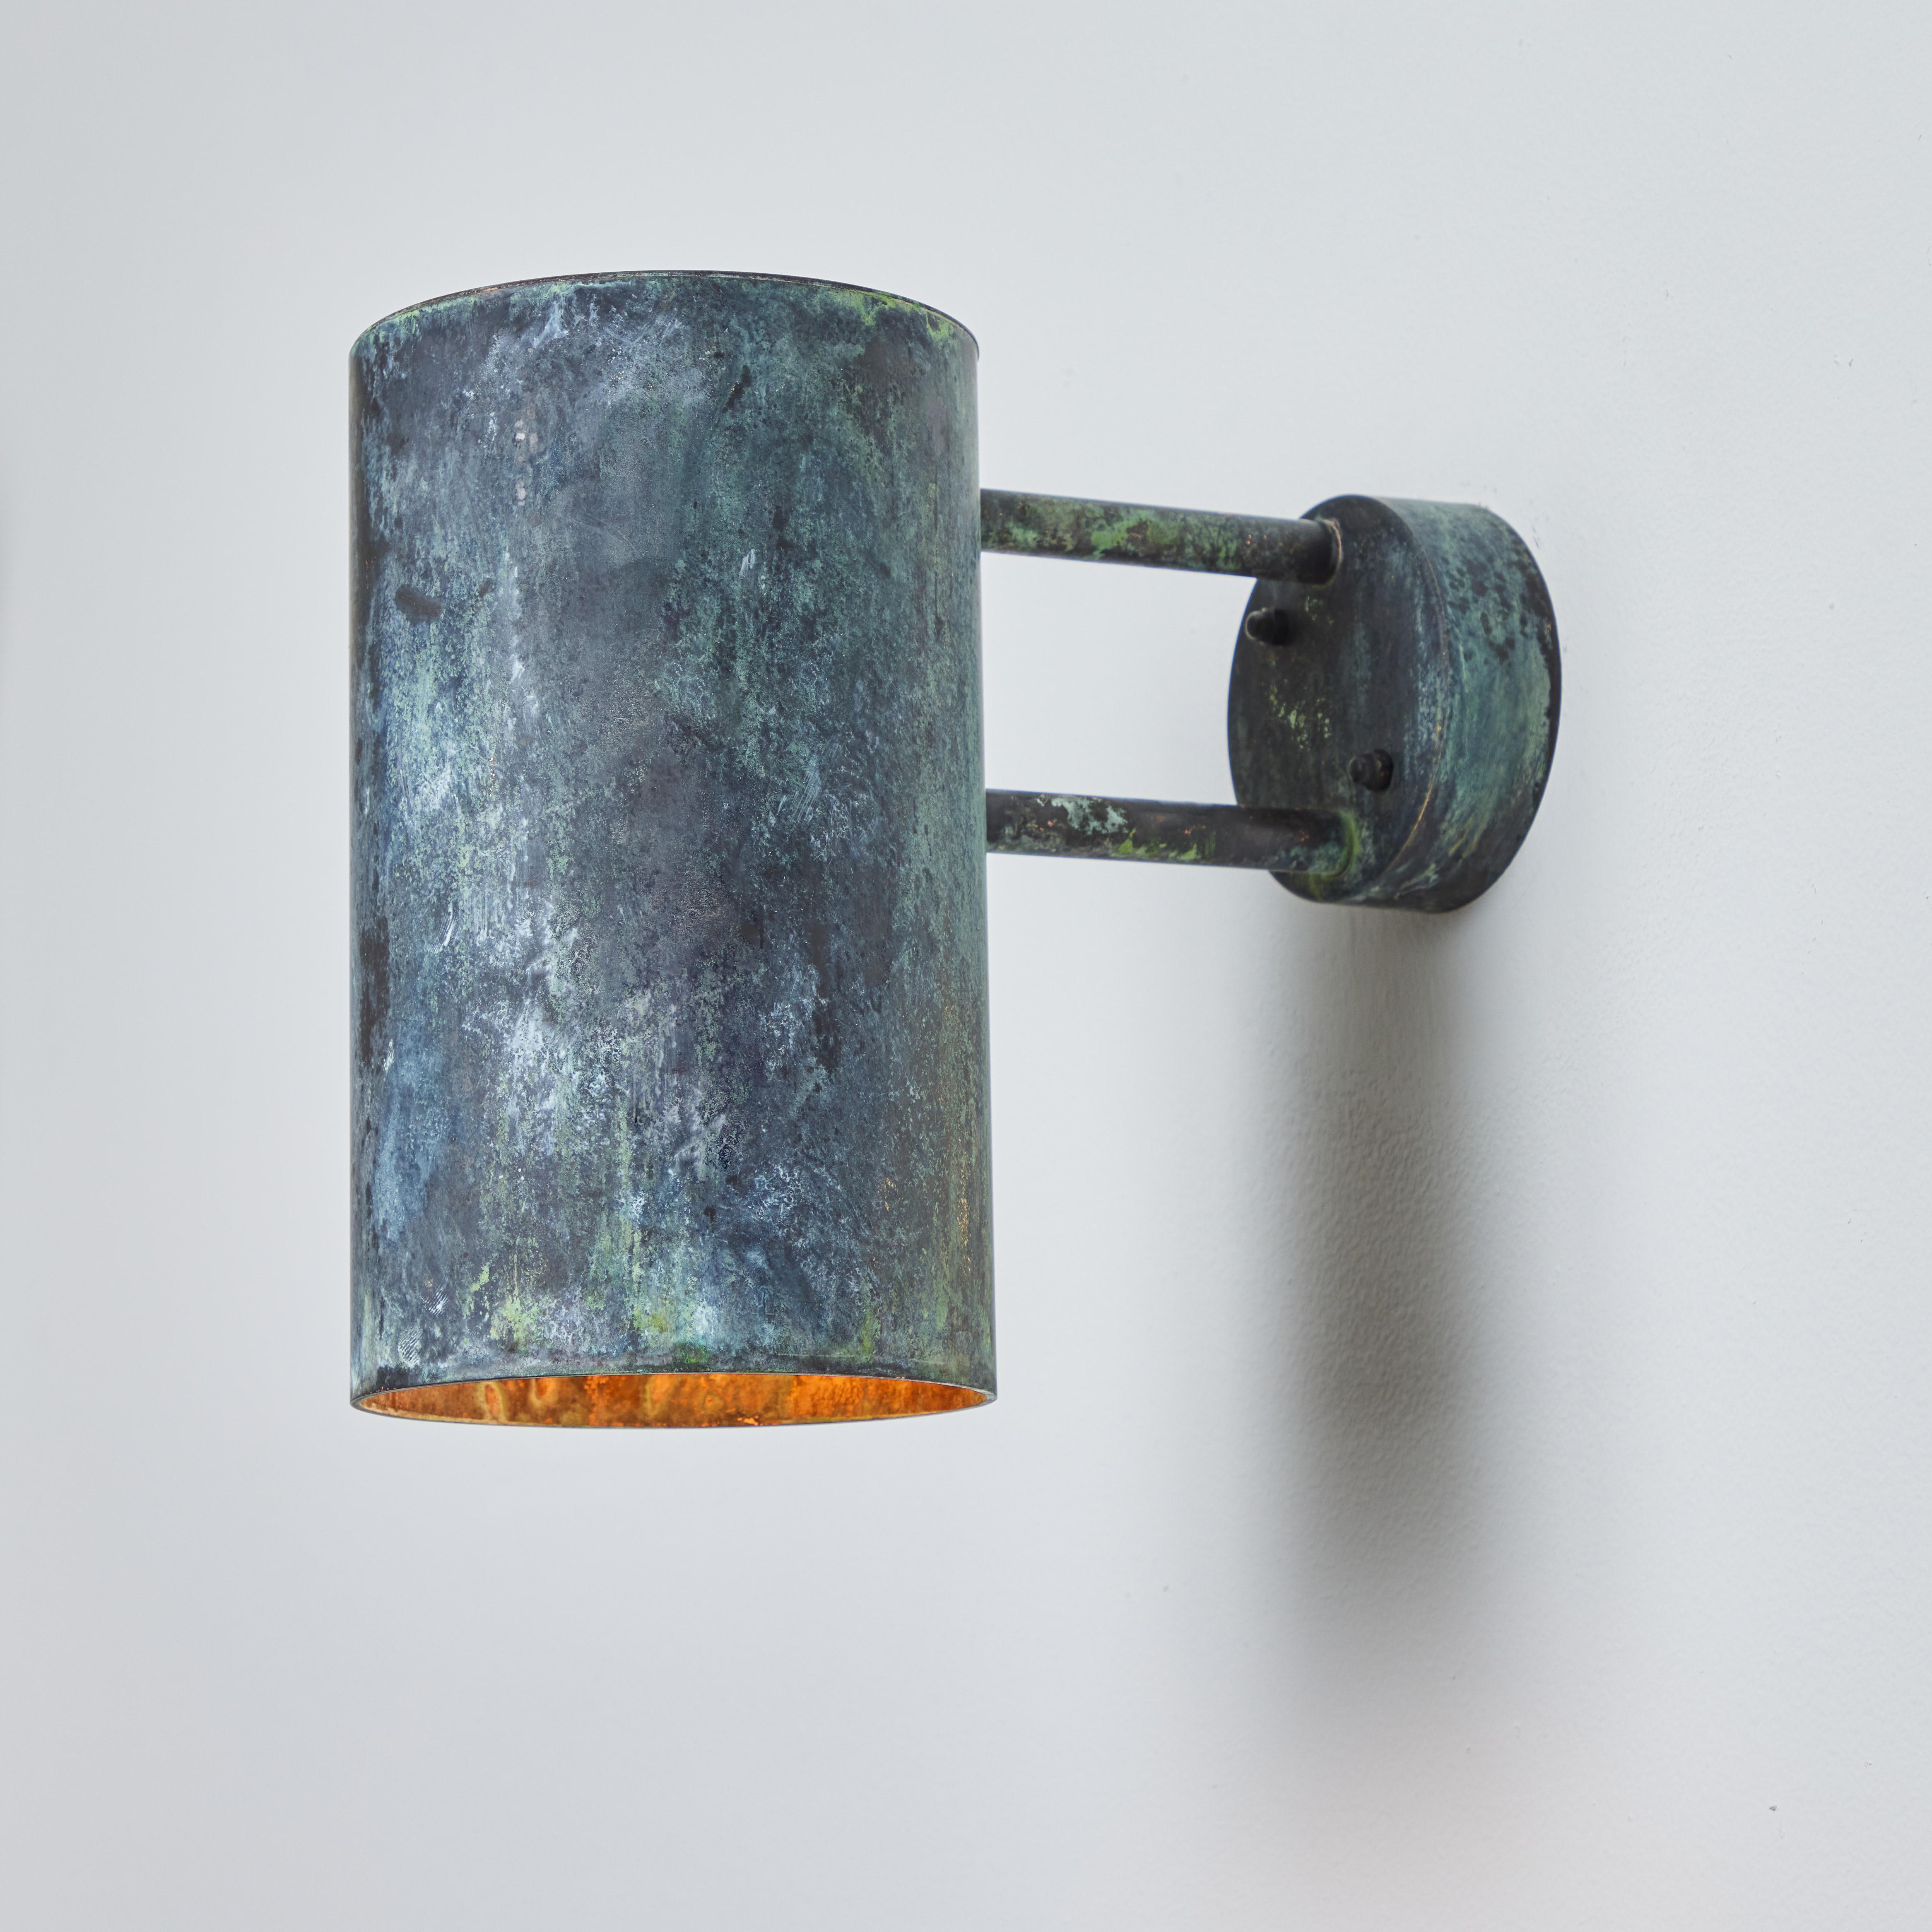 Large Hans-Agne Jakobsson C 627 'Rulle' darkly patinated outdoor sconce. An exclusive made for U.S. and UL listed authorized re-edition of the classic Swedish design executed in darkly patinated metal with raw unlacquered metal interior. An